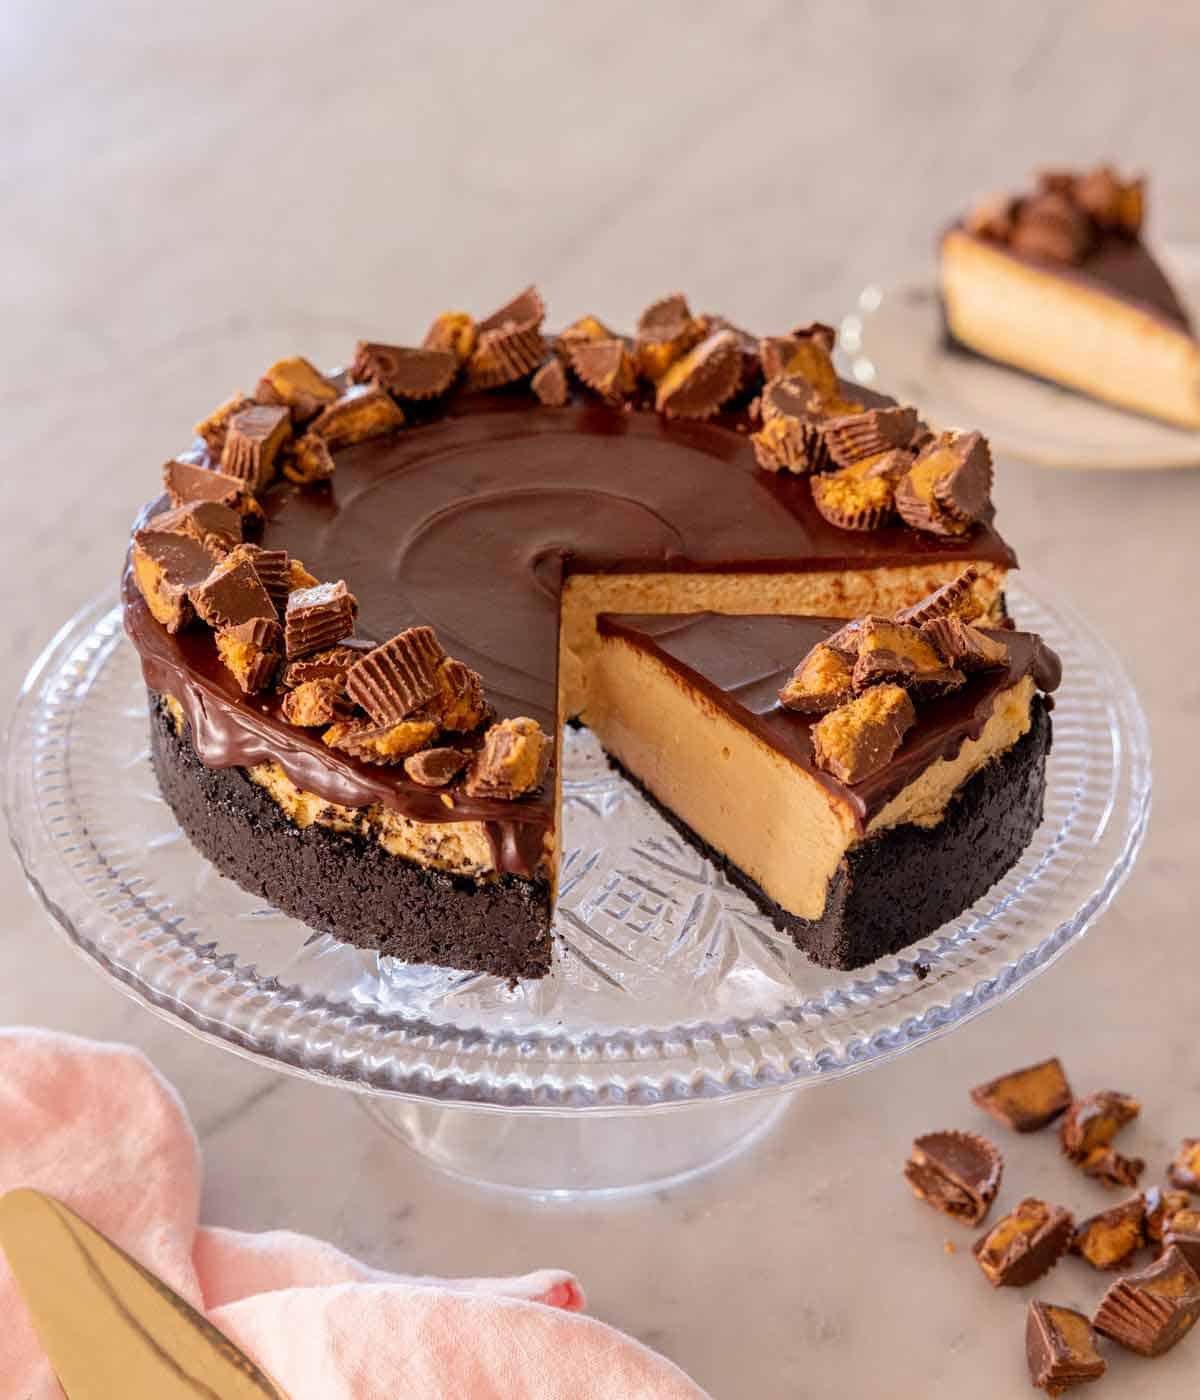 A cake stand with a peanut butter cheesecake with one slice removed and a second slice cut.